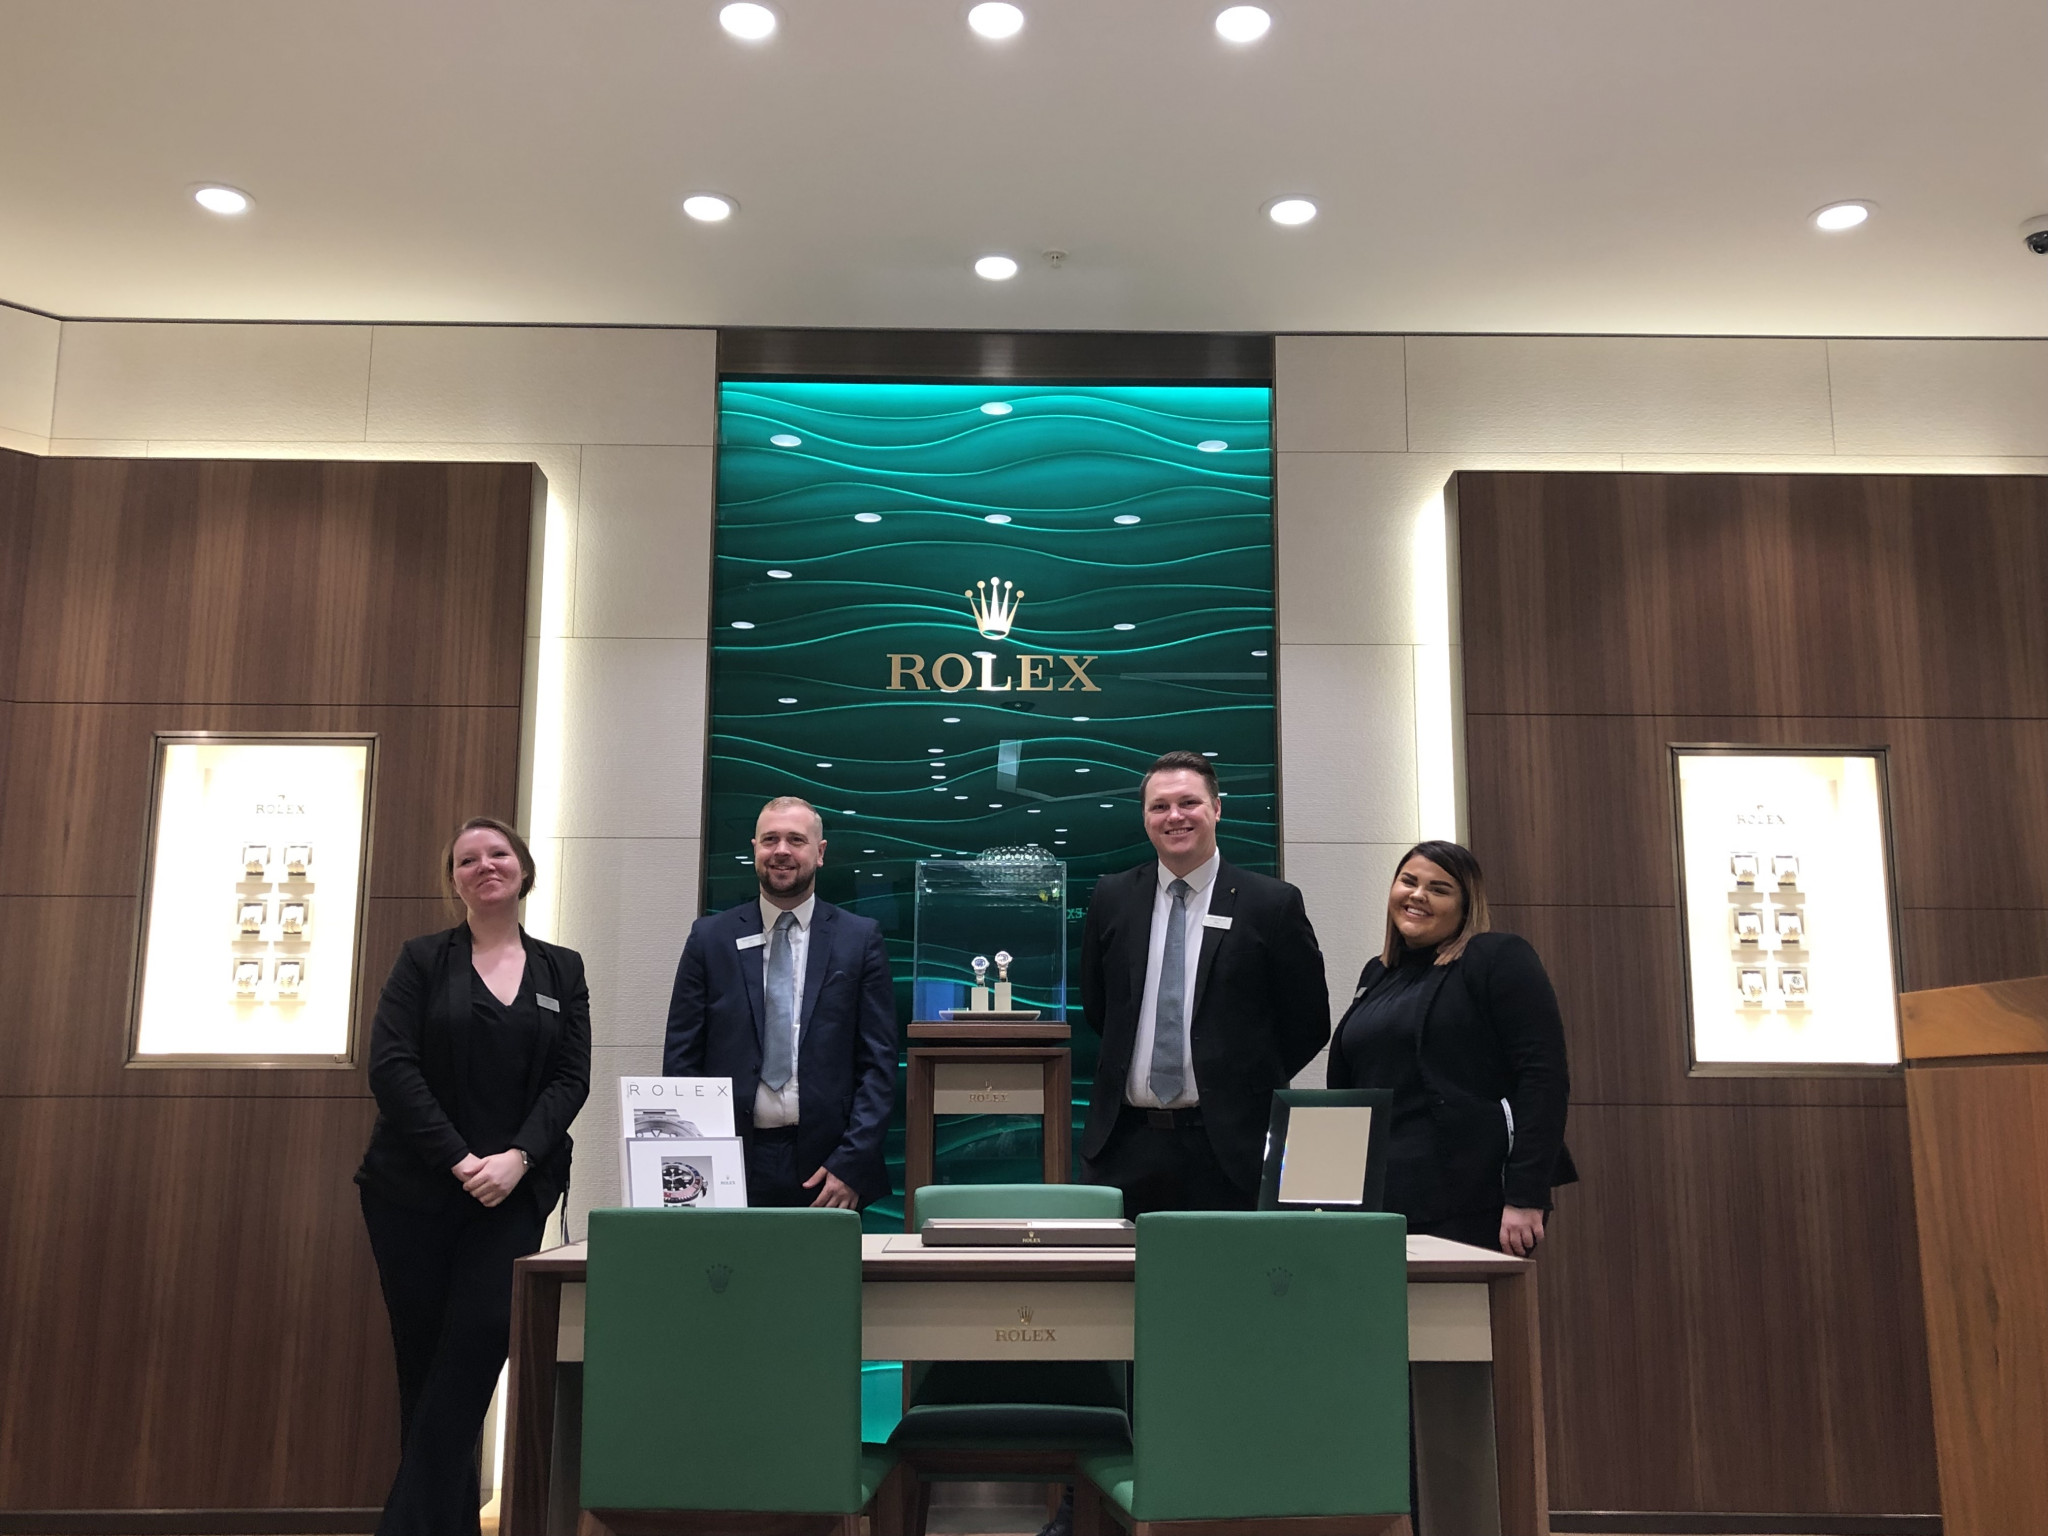 GOLDSMITHS UNVEILS NEW AND IMPROVED CABOT CIRCUS SHOWROOM FEATURING LUXURY BRANDS